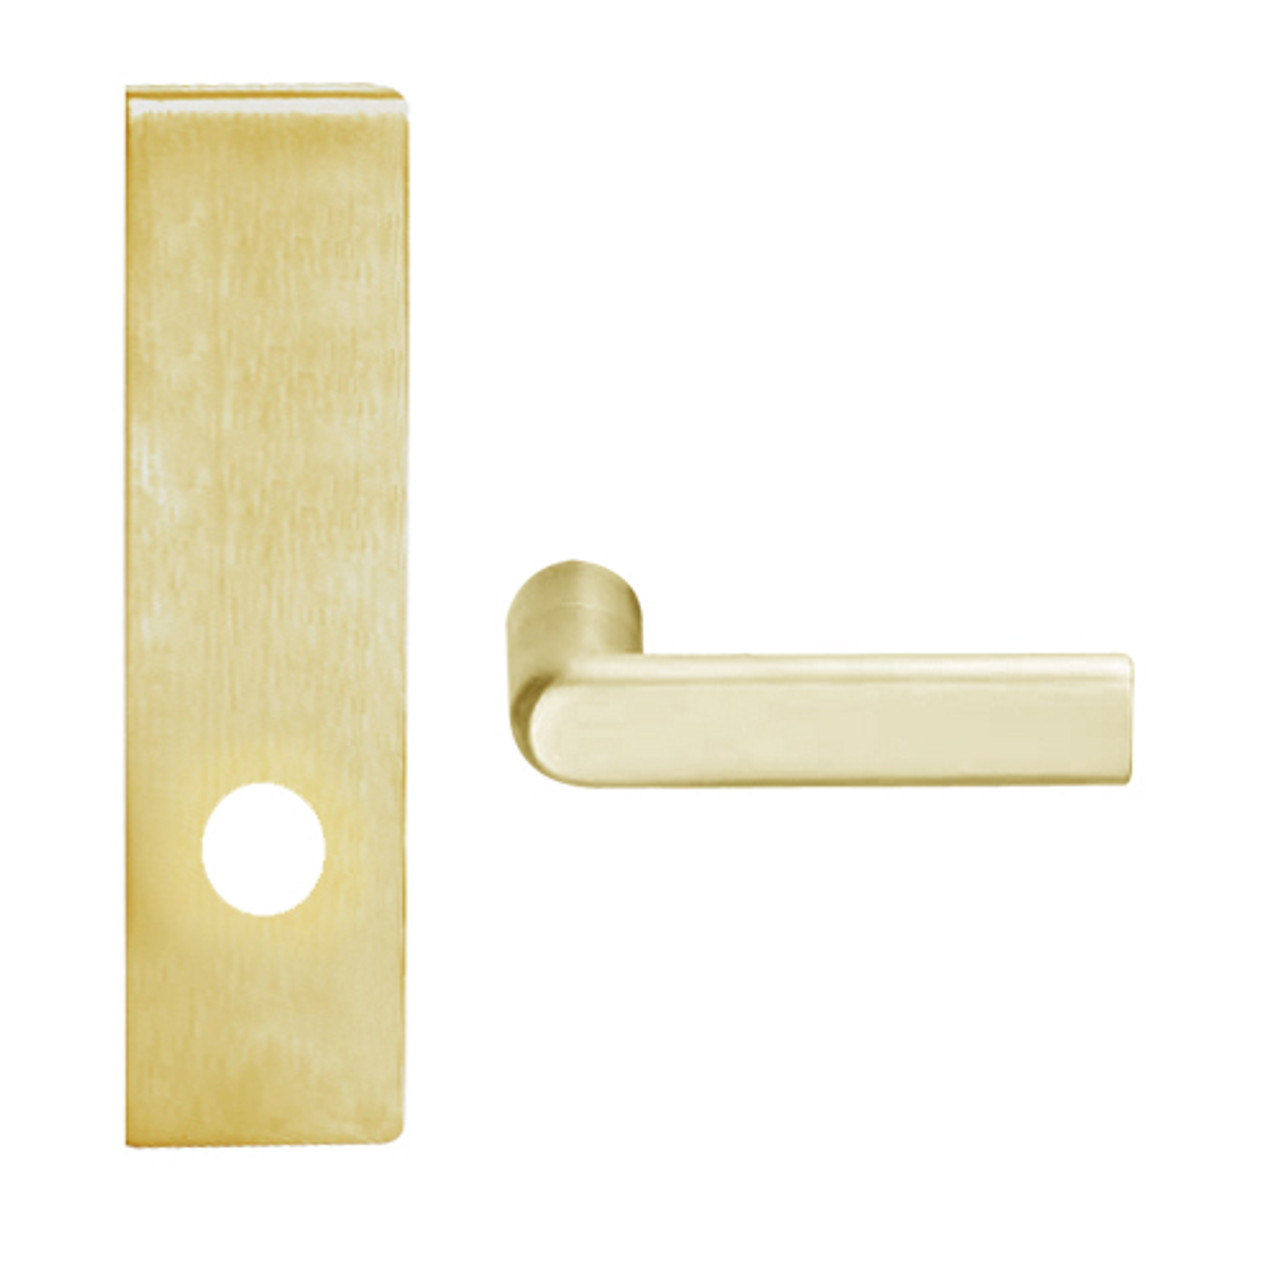 L9010-01N-605 Schlage L Series Passage Latch Commercial Mortise Lock with 01 Cast Lever Design in Bright Brass